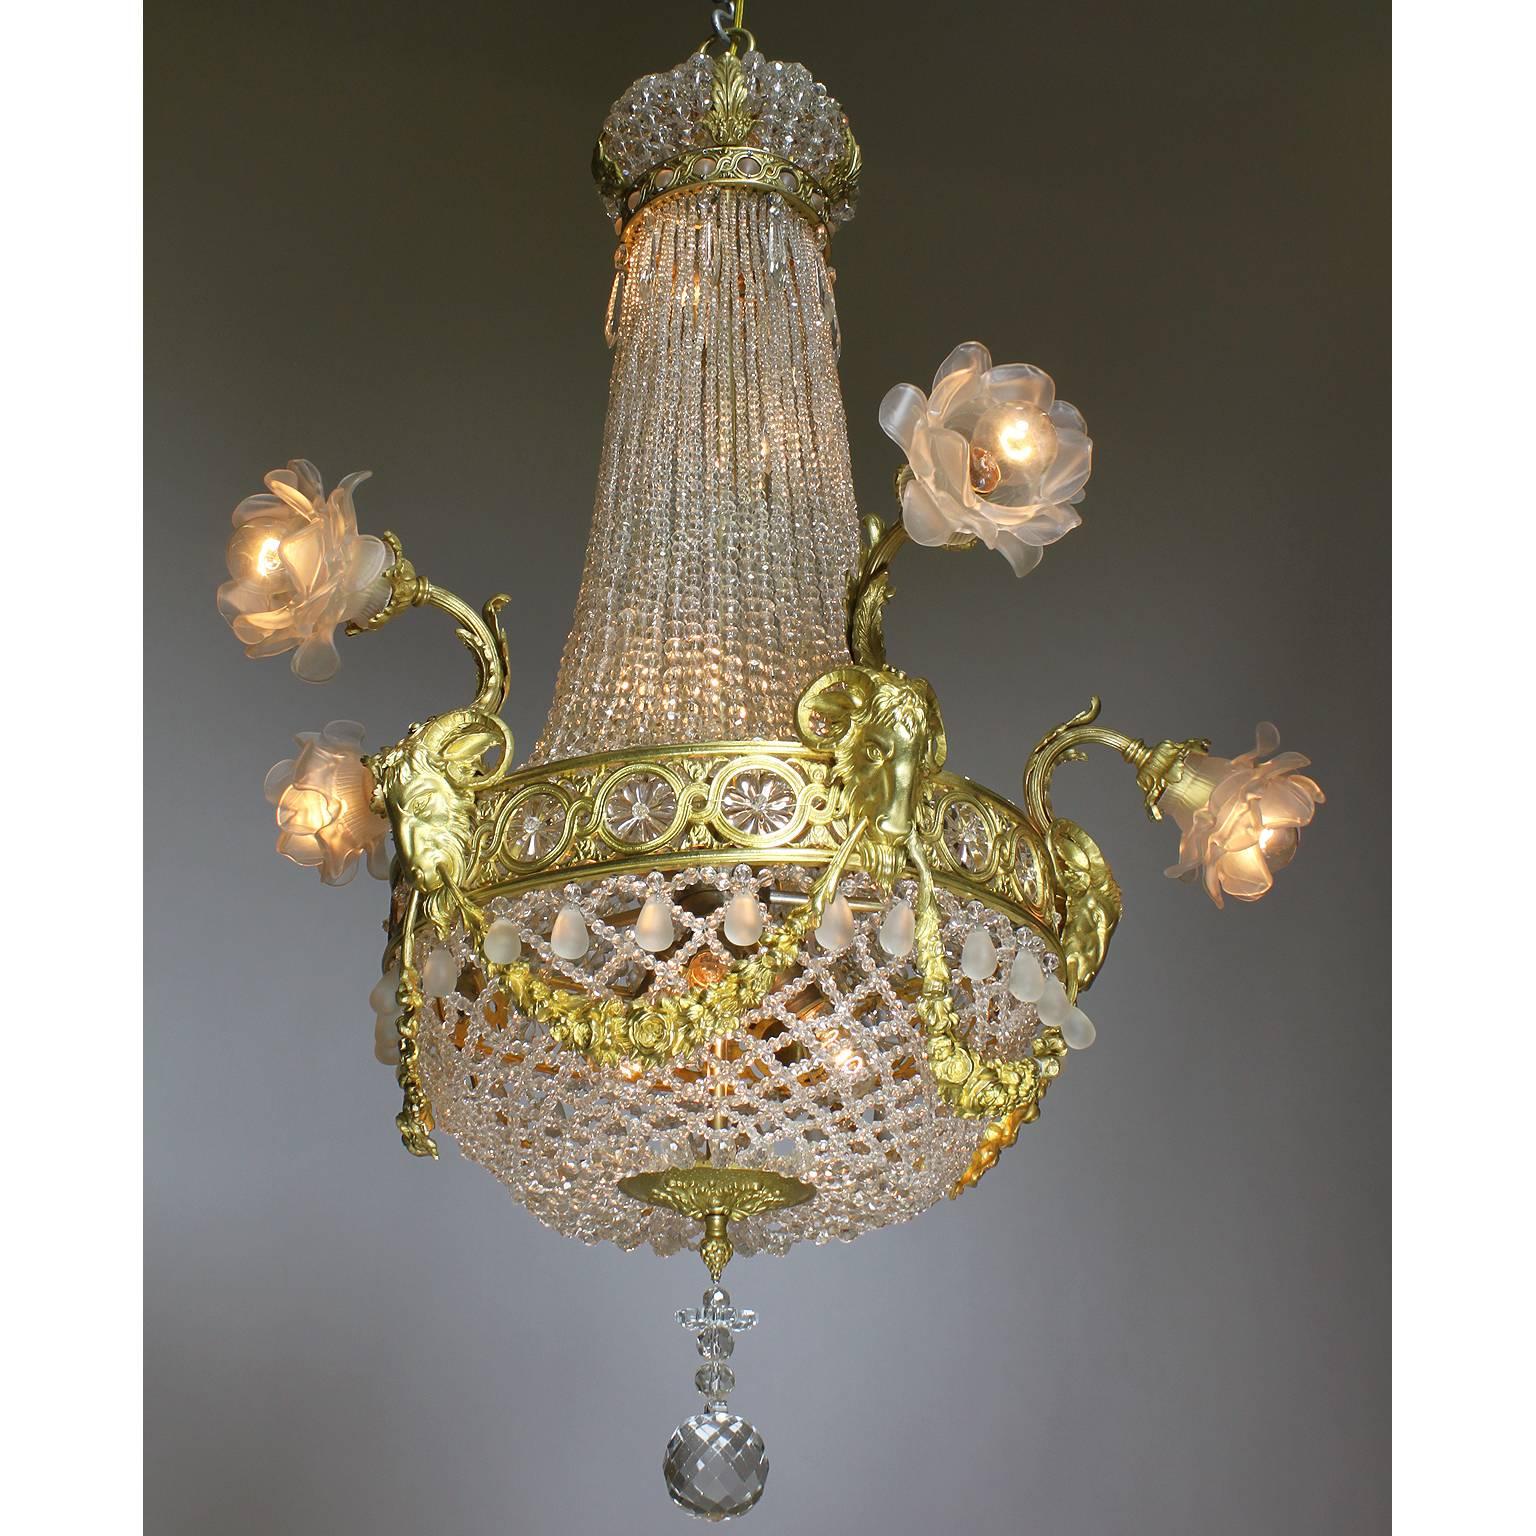 A fine French 19th-20th century Louis XVI style gilt-bronze and beaded glass twelve-light figural chandelier. The ornate gilt-bronze frame surmounted with six scrolled outer lights fitted with floral frosted glass shades, each above gilt-bronze